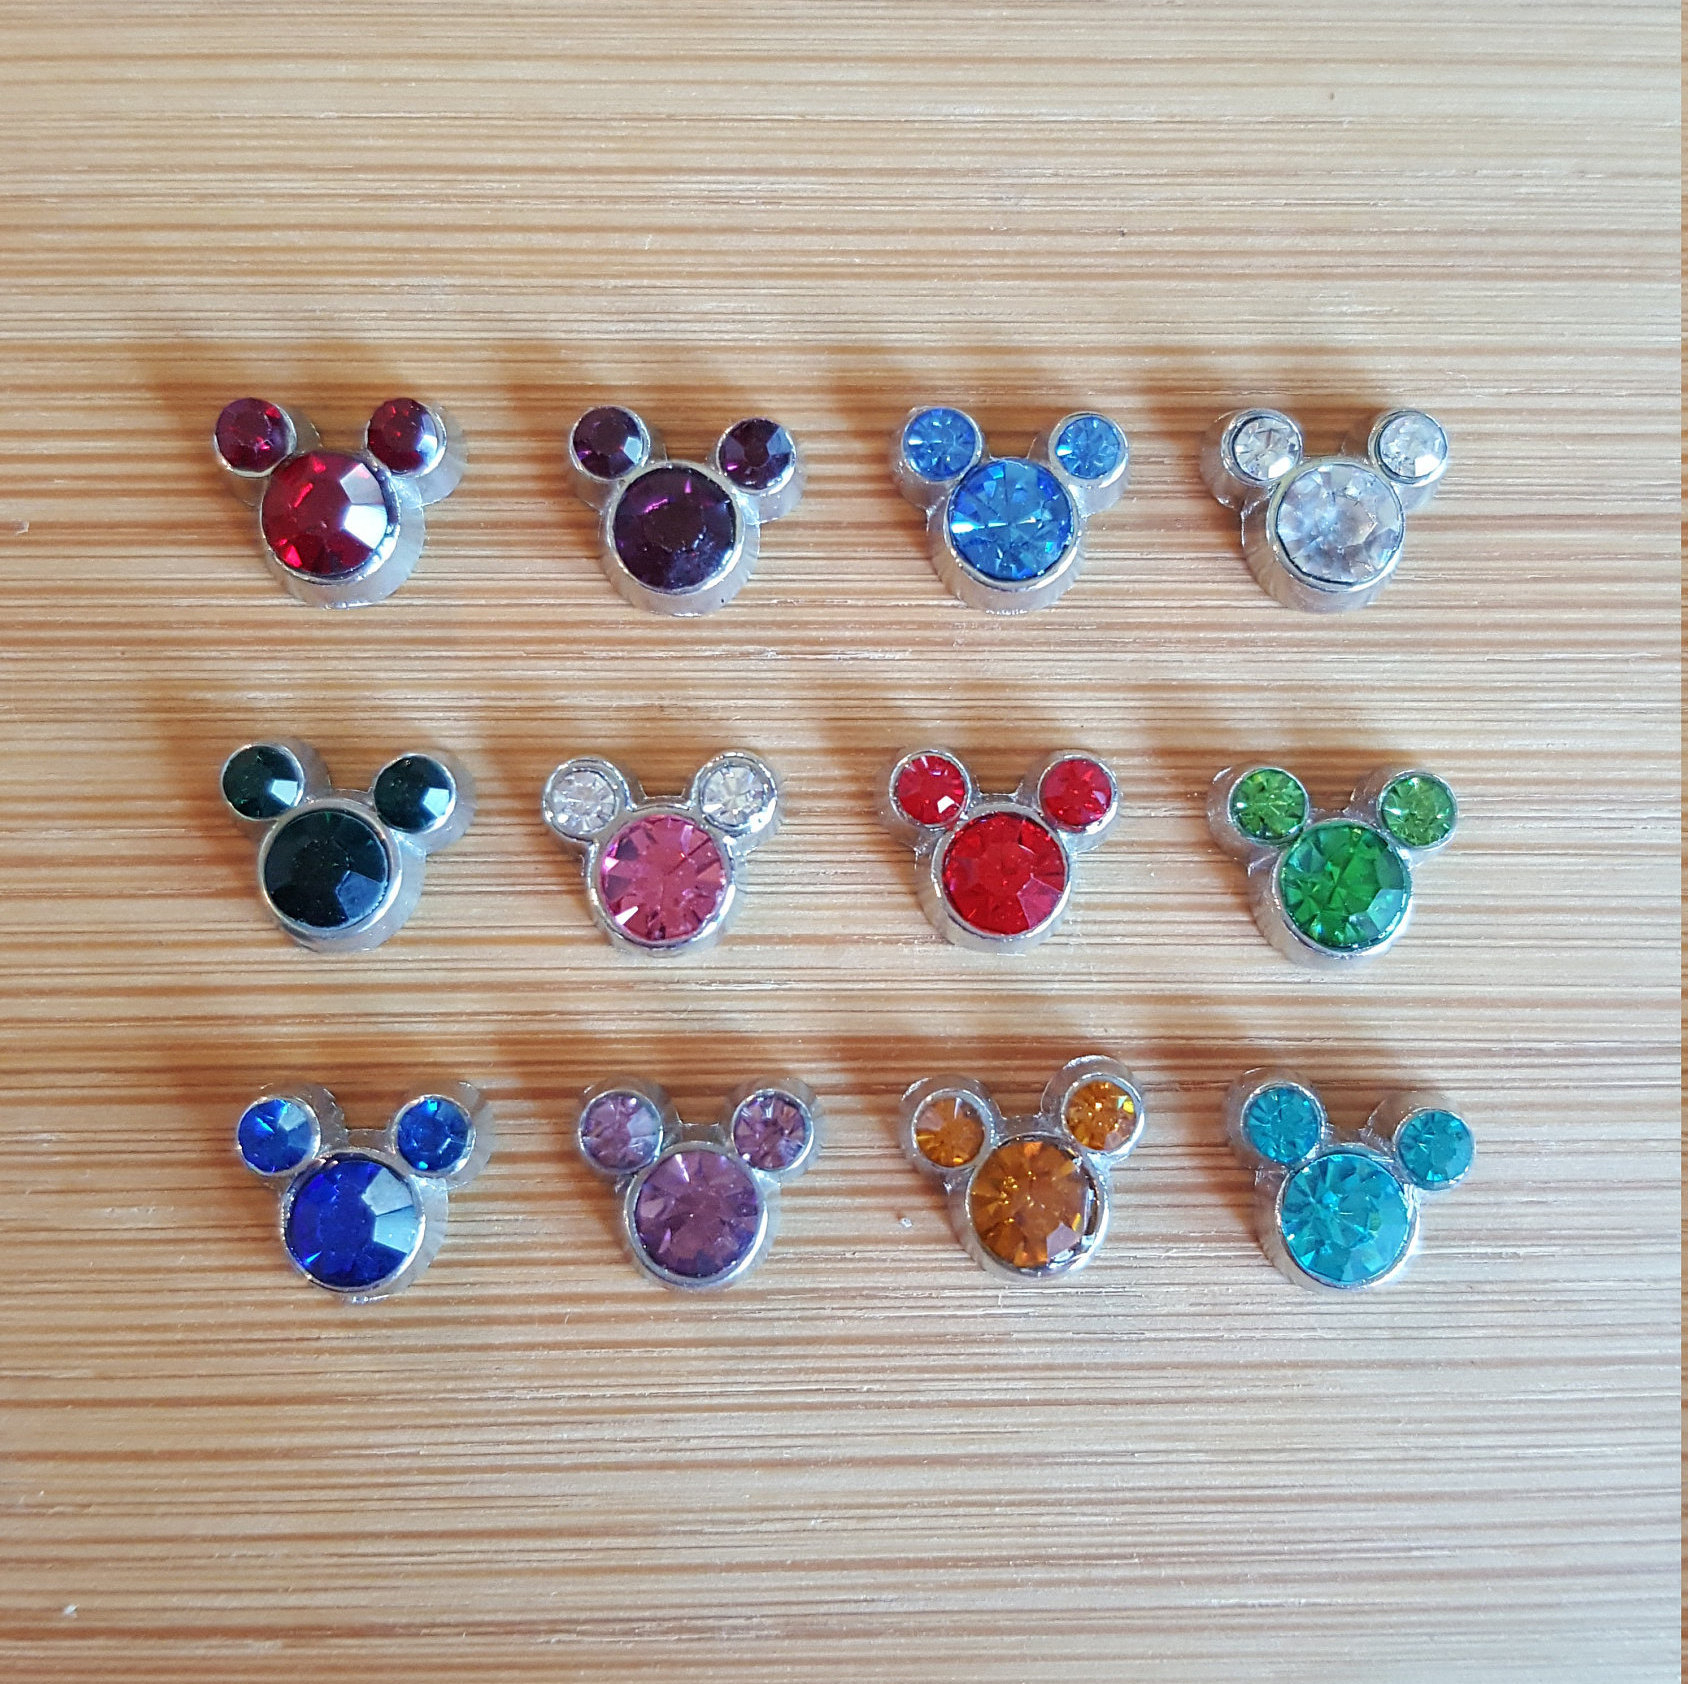 Disney Origami Owl Charms Birthstone Ears Floating Charms Colorful Charms For Lockets Mickey Inspired Charms Compatible With Origami Owl